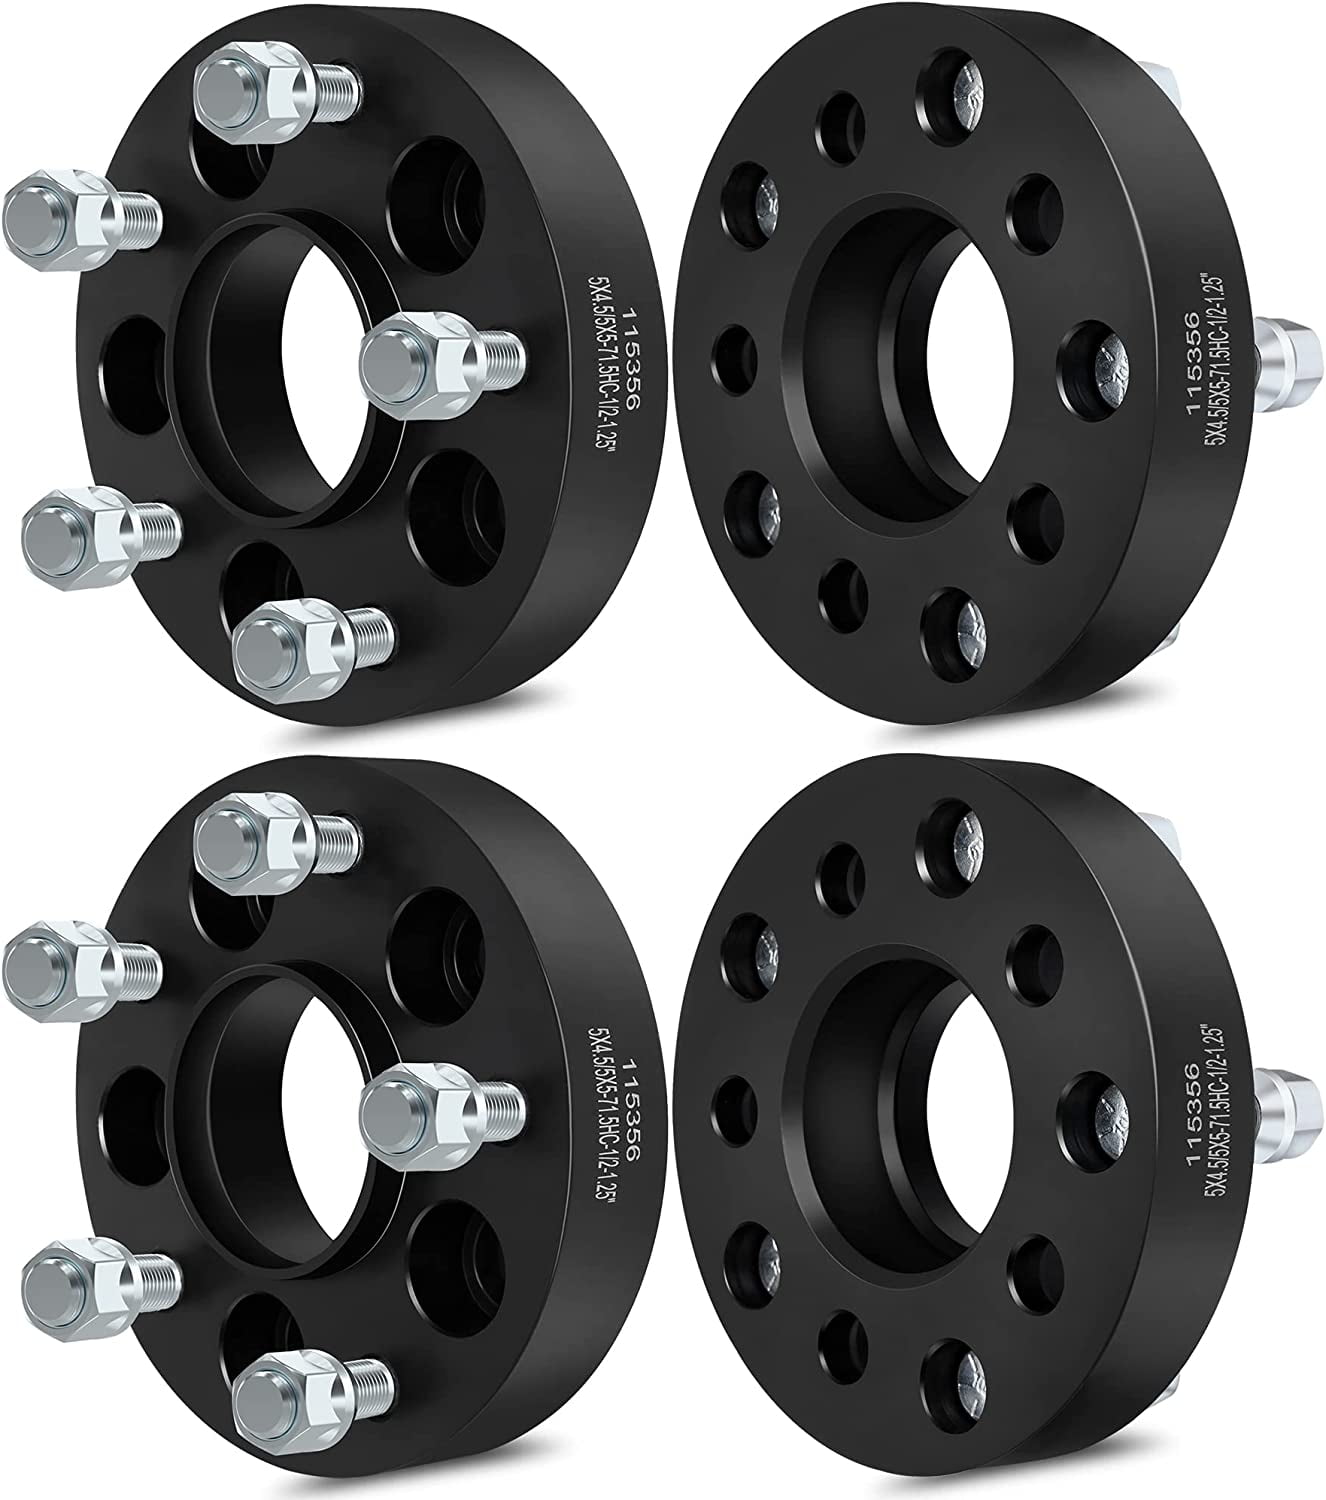 ECCPP Pair of 5x114.3 Wheel Spacers 1.5 5 Lug 5x4.5 to 5x4.5 82.5mm CB  with 1/2x20 Studs Fit for Mustang Ranger Explorer Edge Crown Victoria for